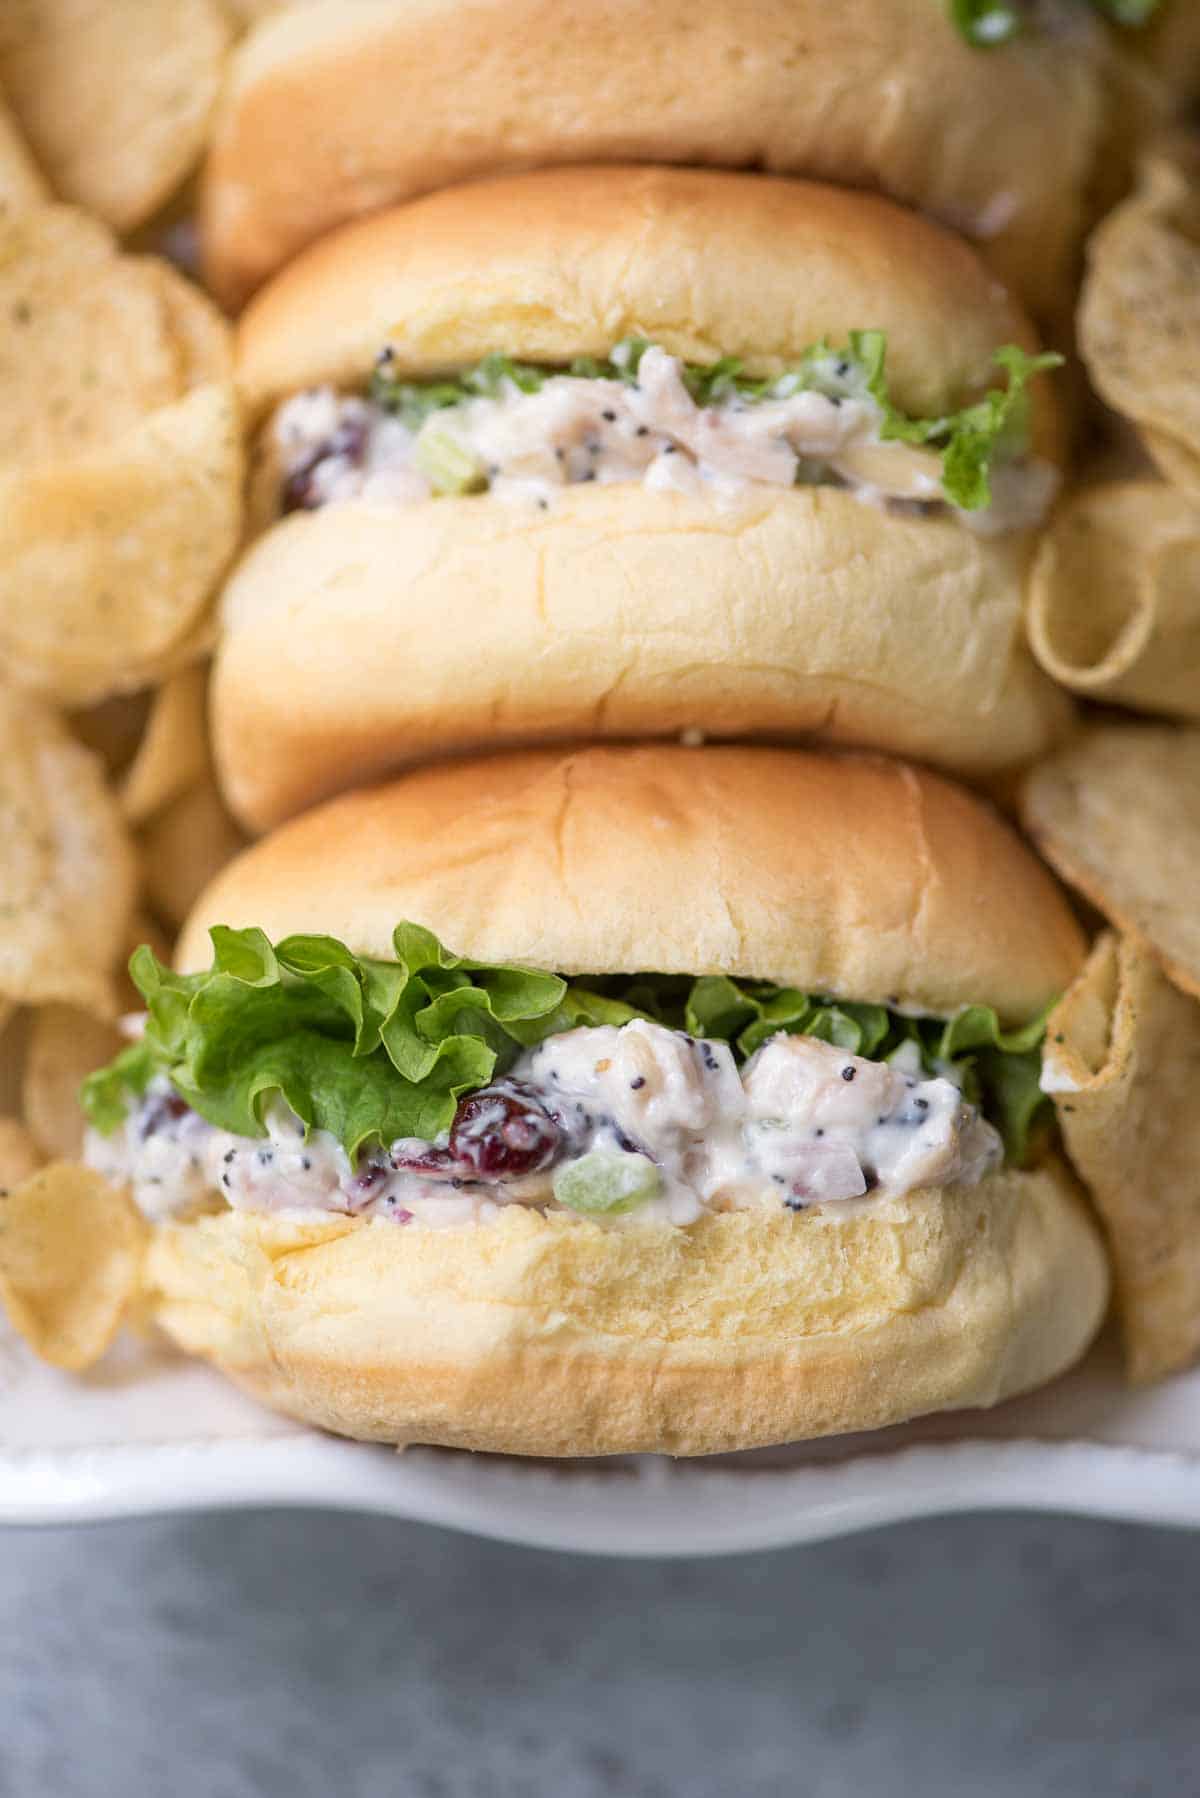 Small buns filled with cranberry chicken salad and lettuce.